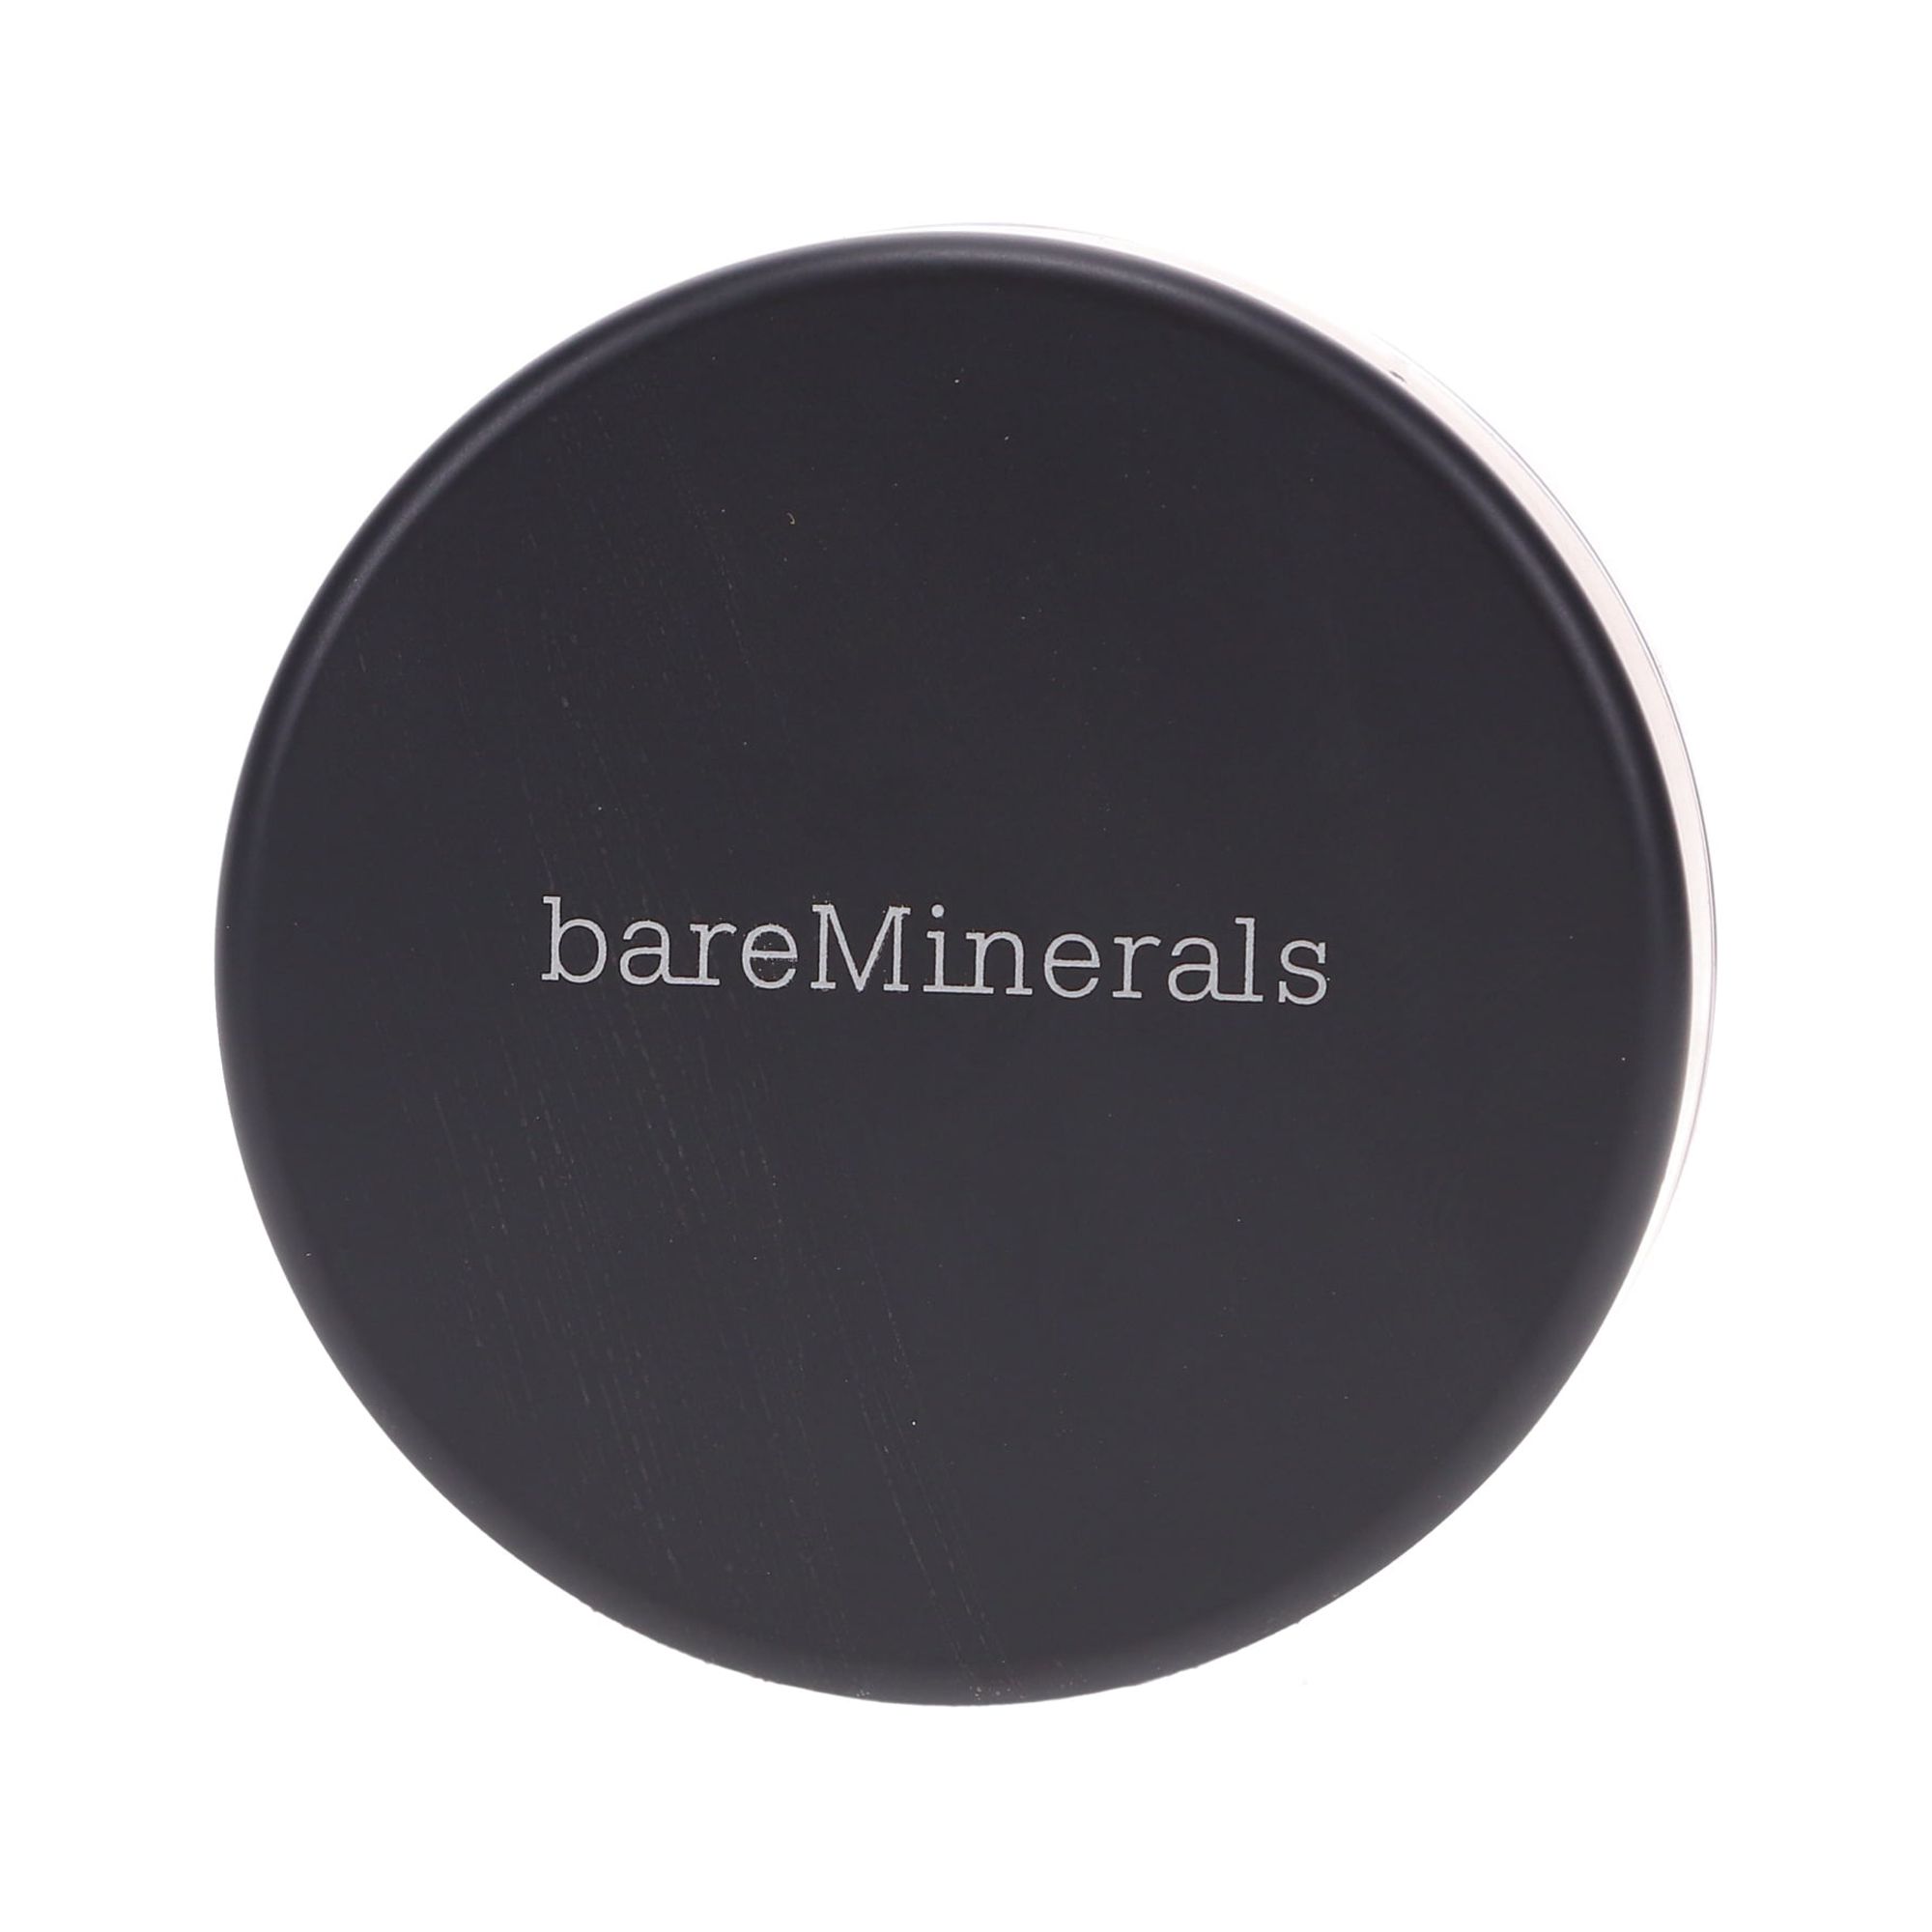 All-Over Face Color - Warmth by bareMinerals for Women - 0.05 oz Powder - image 2 of 8